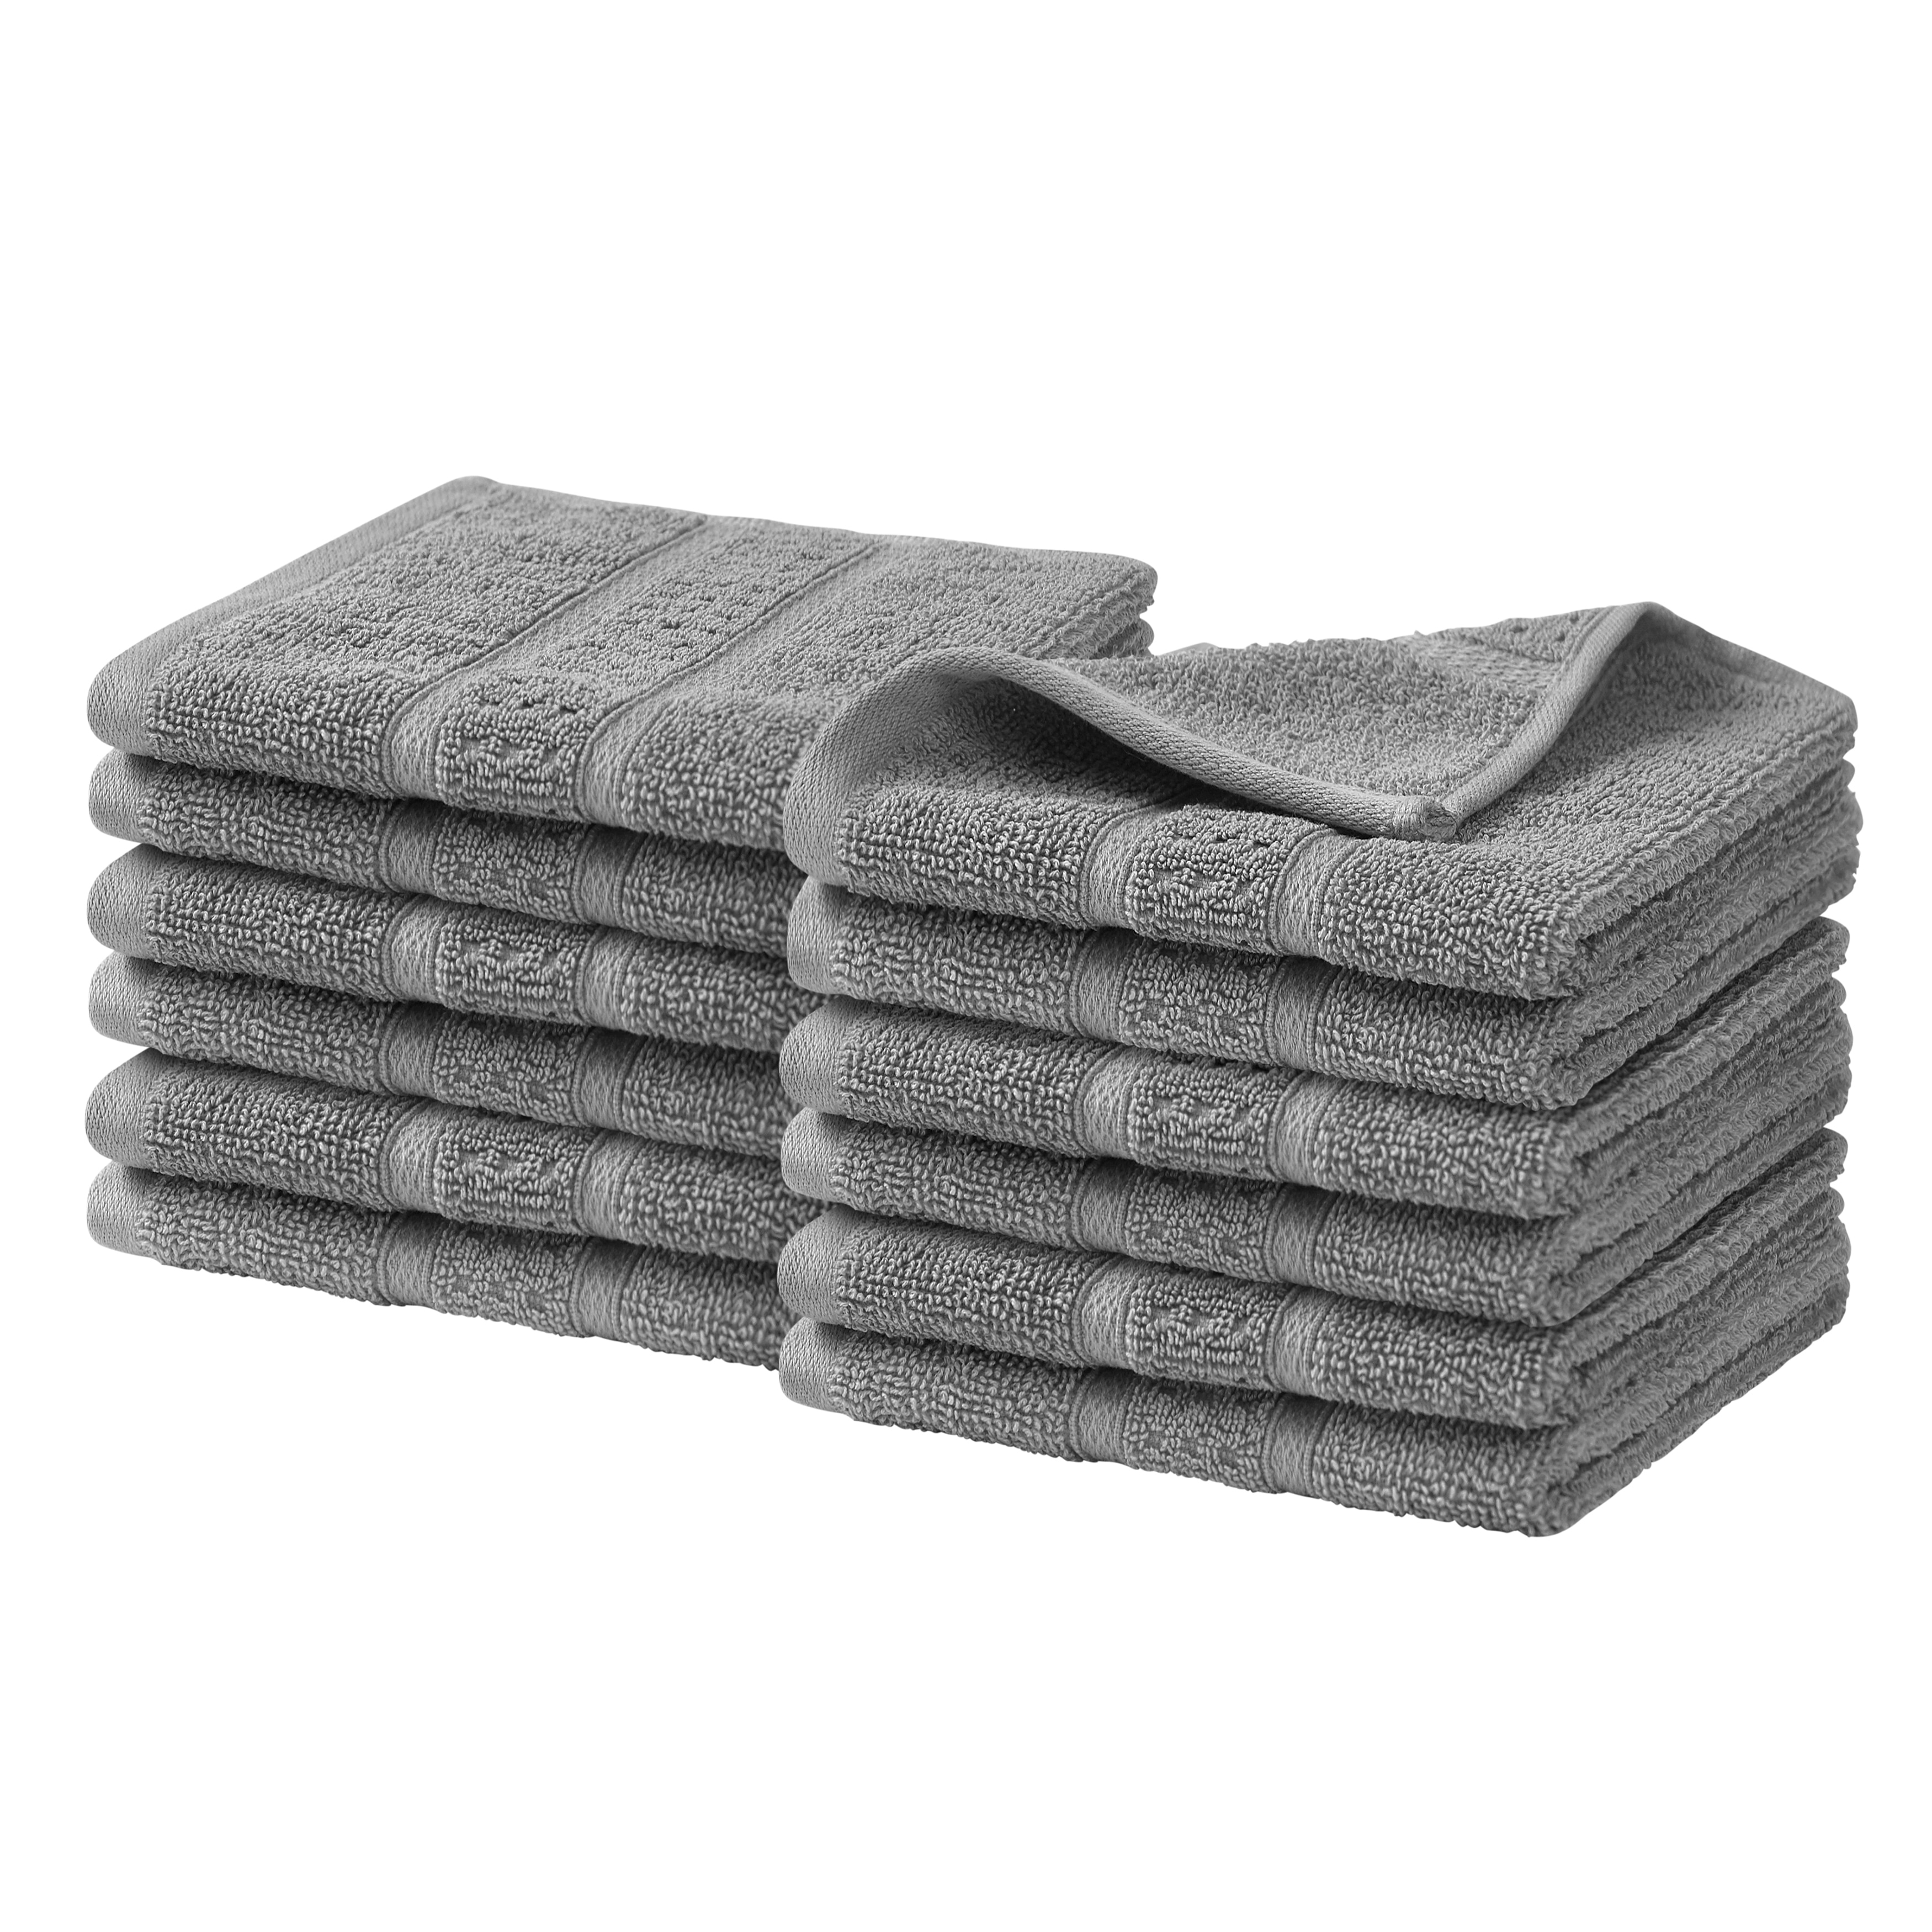 https://ak1.ostkcdn.com/images/products/is/images/direct/188b561dbb9331a85e6df7f49ff35d79e751410f/Nautica-Oceane-Solid-Wellness-Towel-Collection.jpg